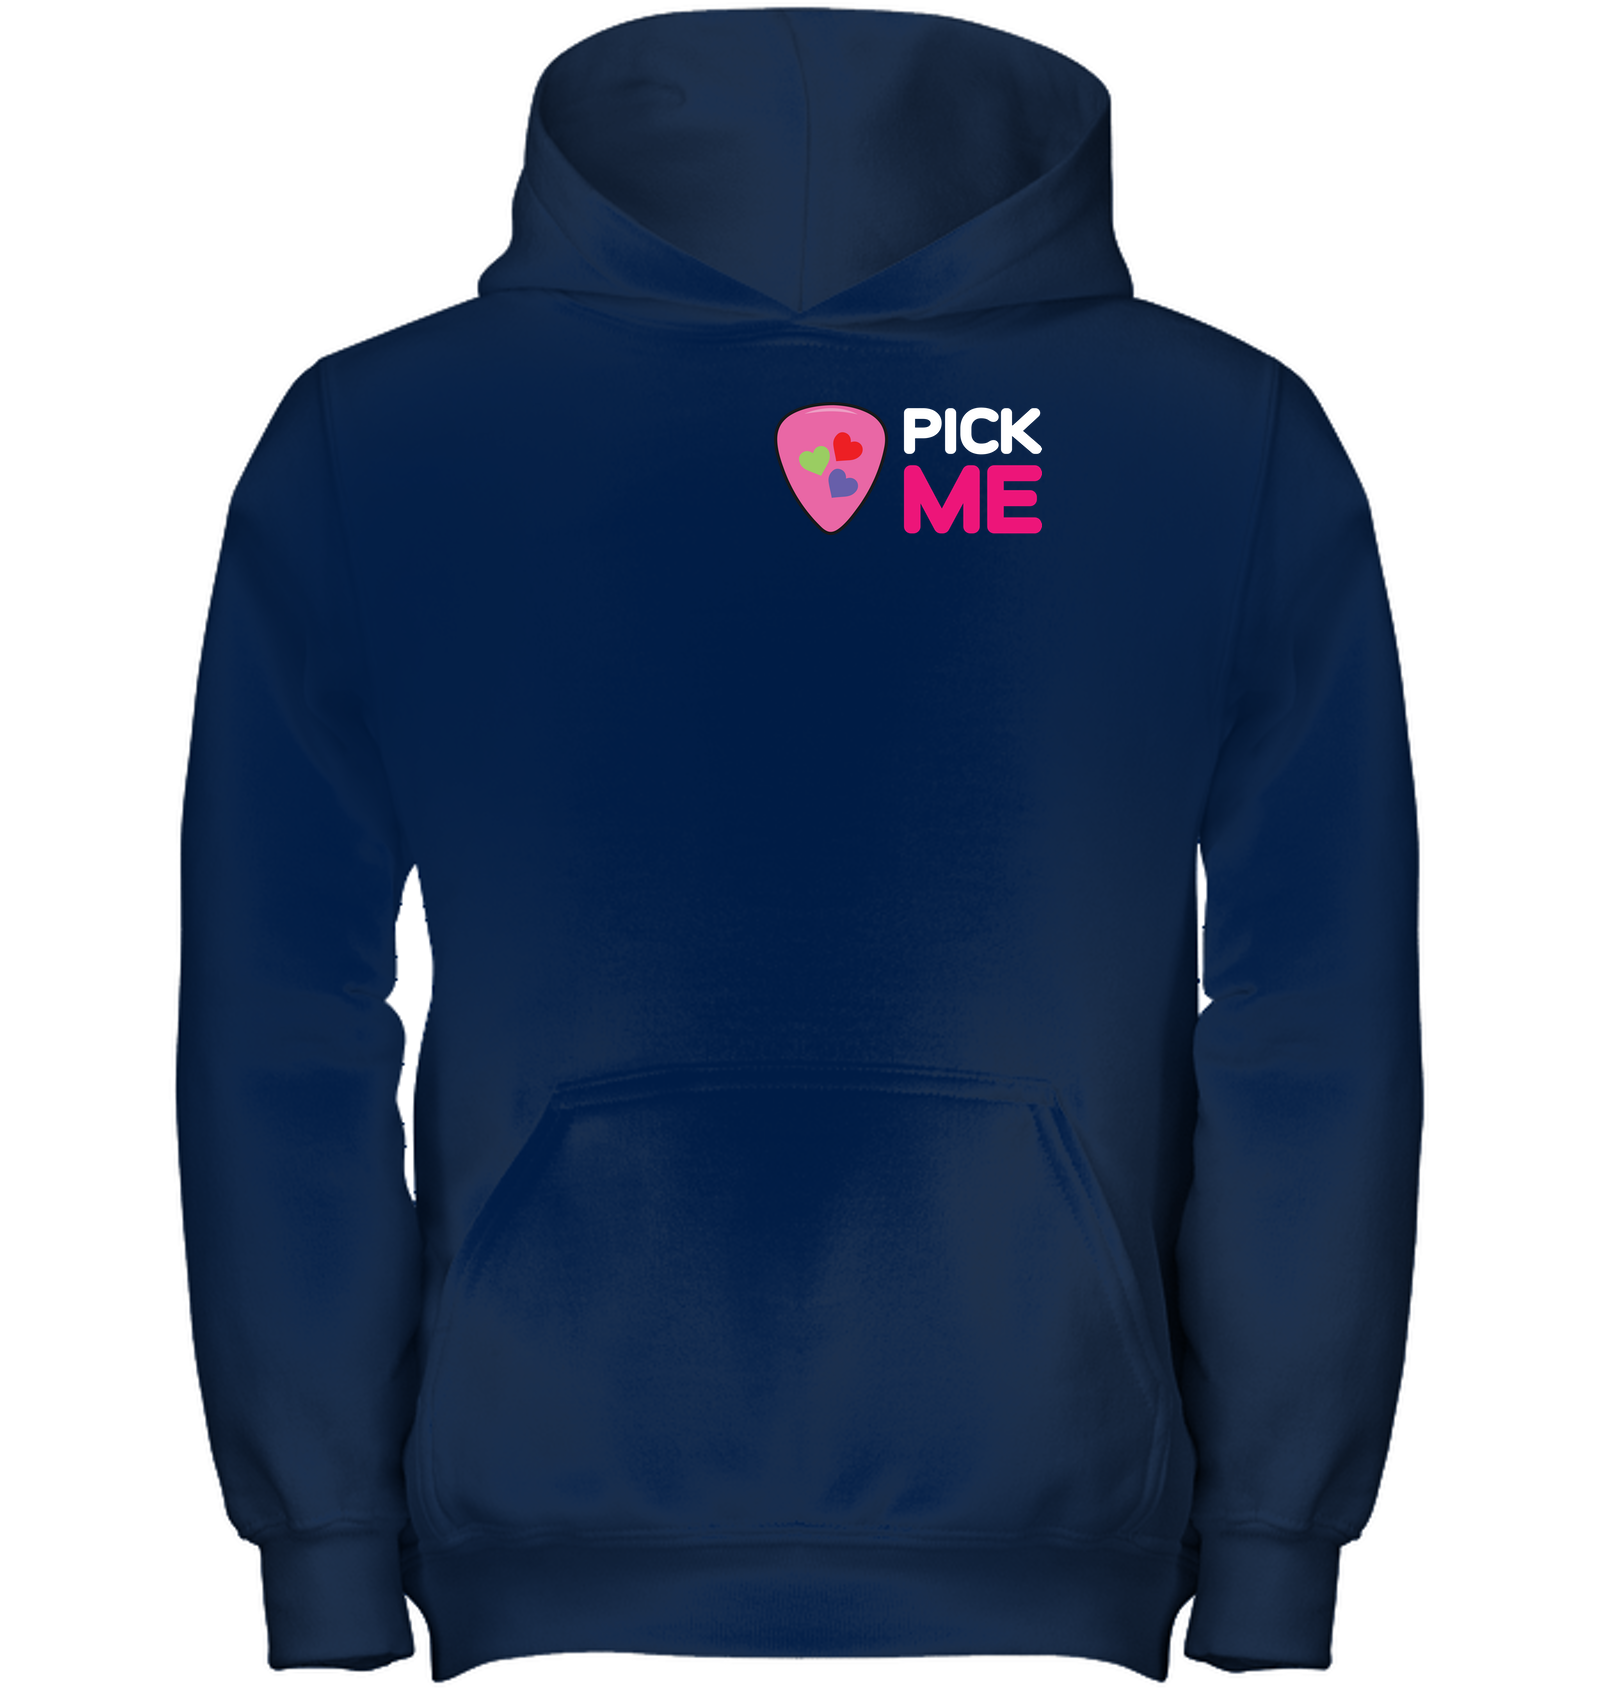 Pick Me (Pocket Size) - Gildan Youth Heavyweight Pullover Hoodie